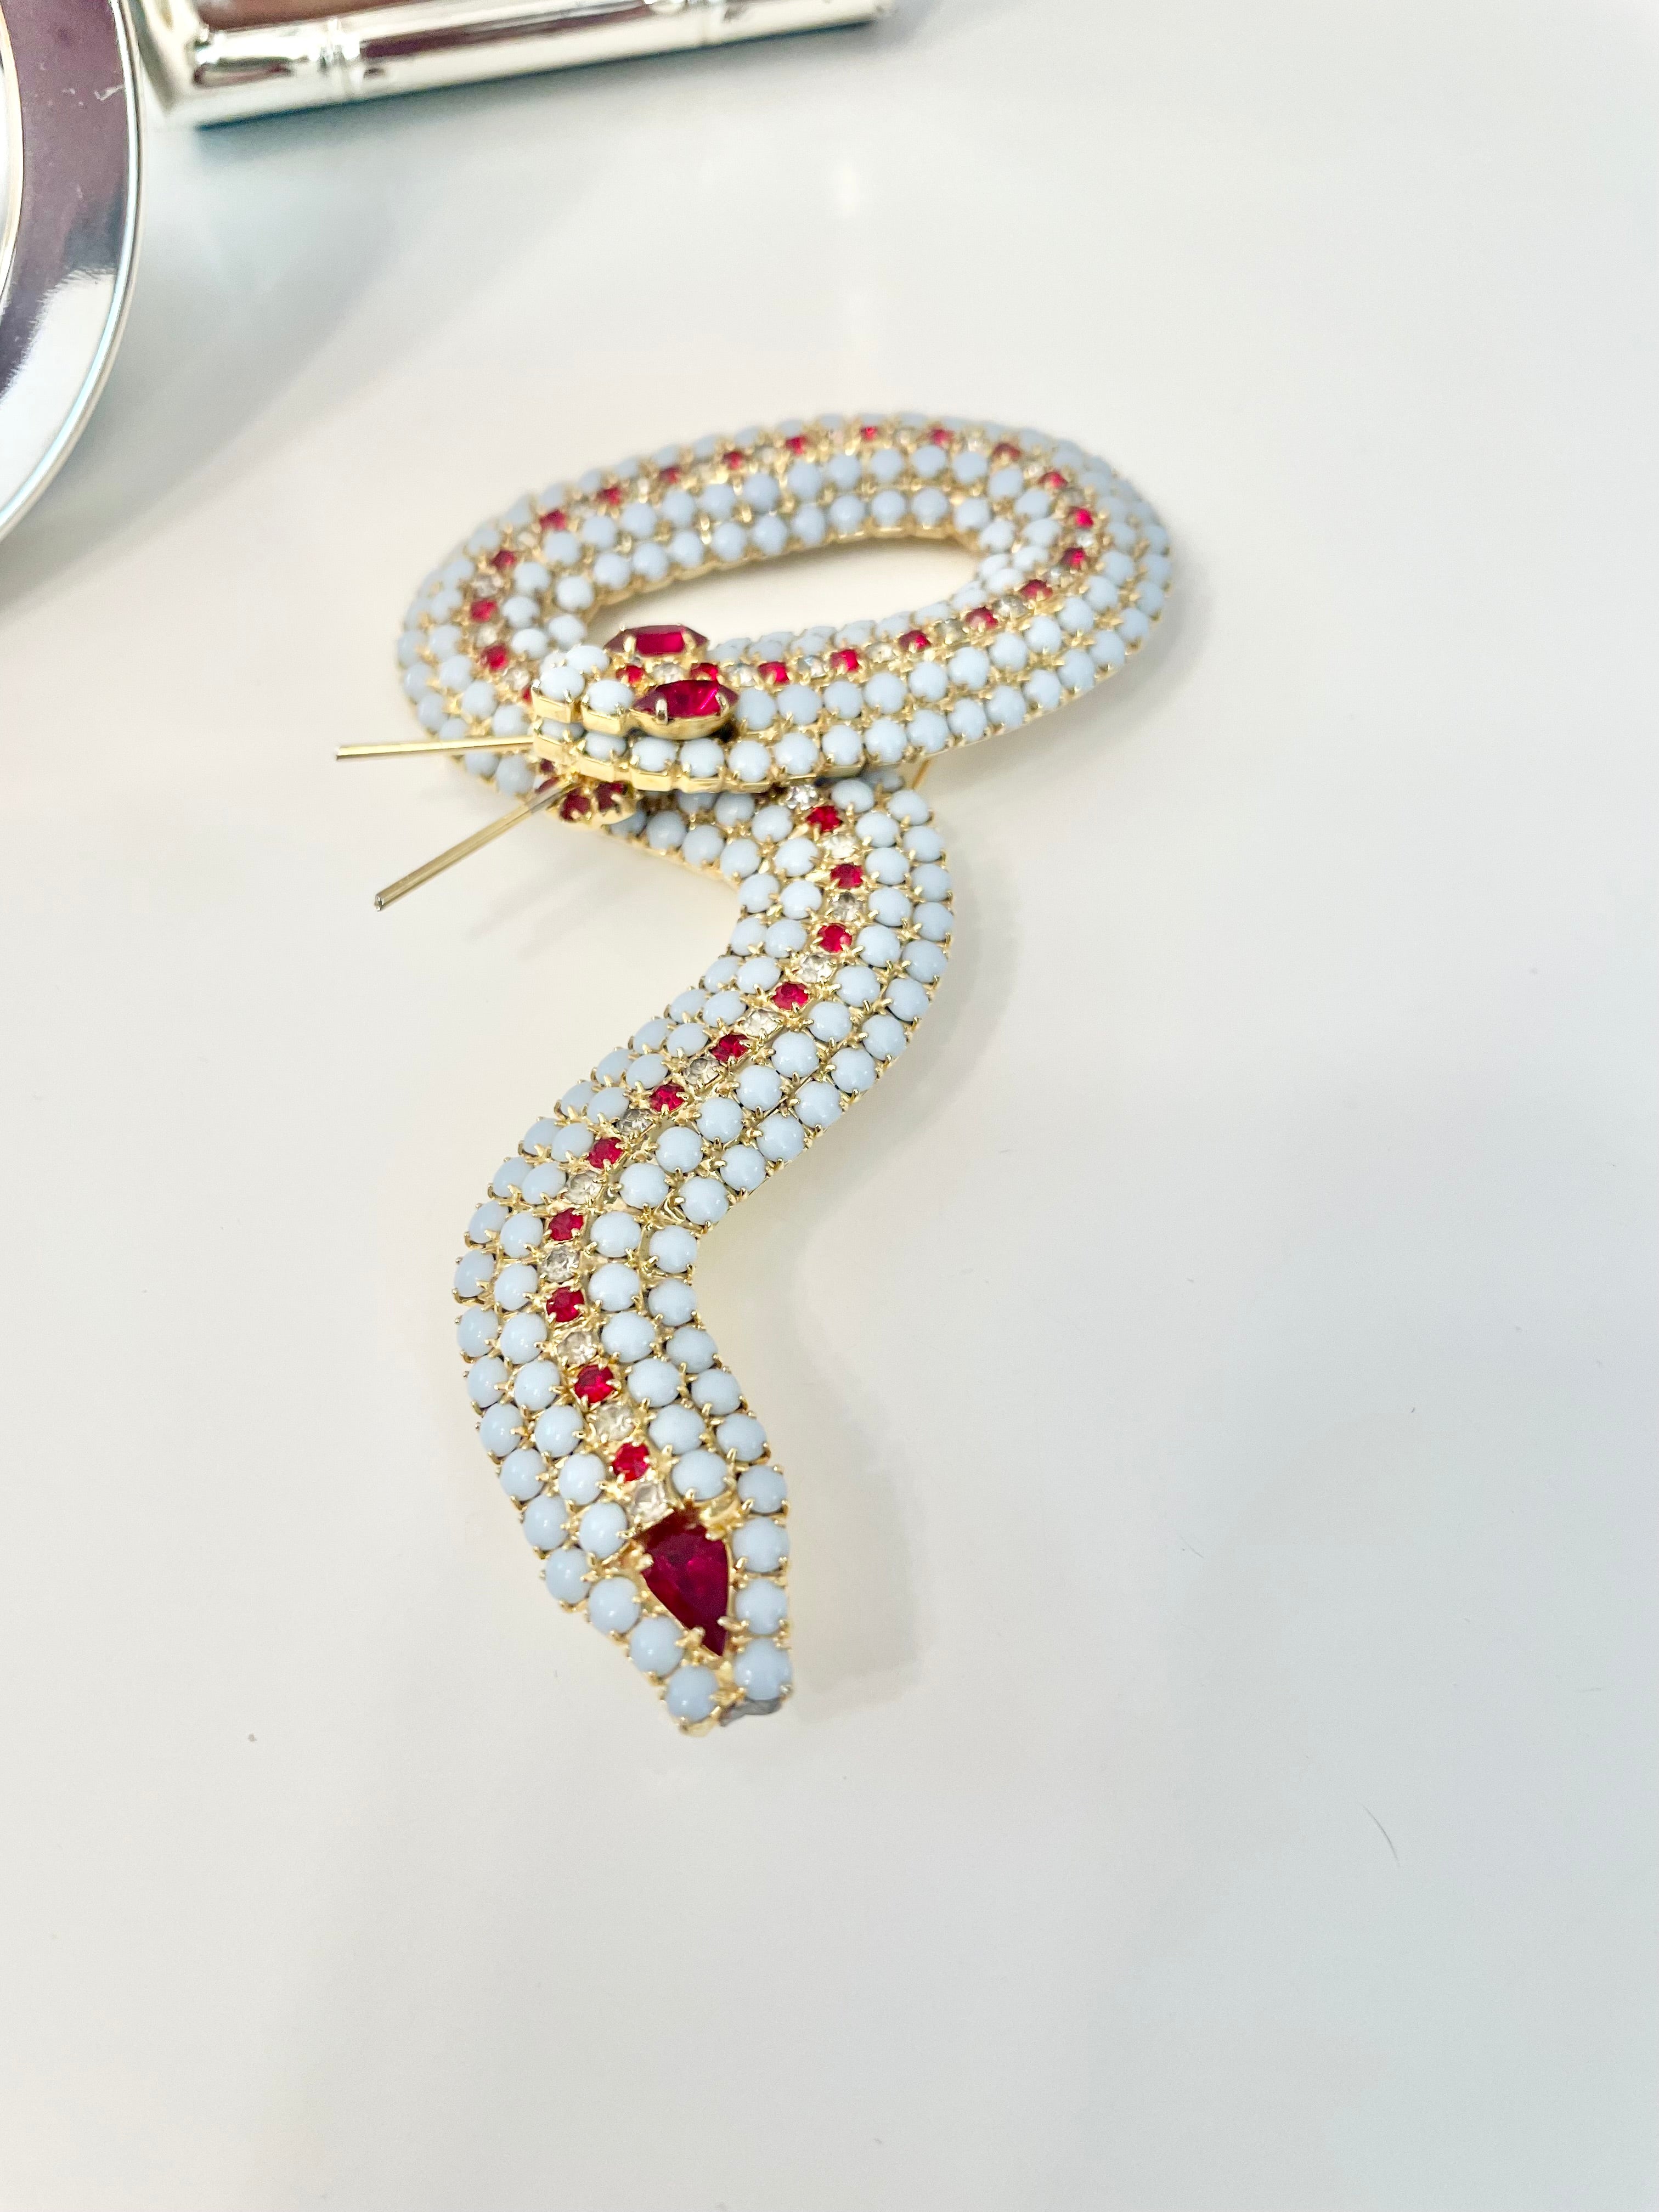 Absolutely stunning snake figural brooch... dramatic, and so elegant!